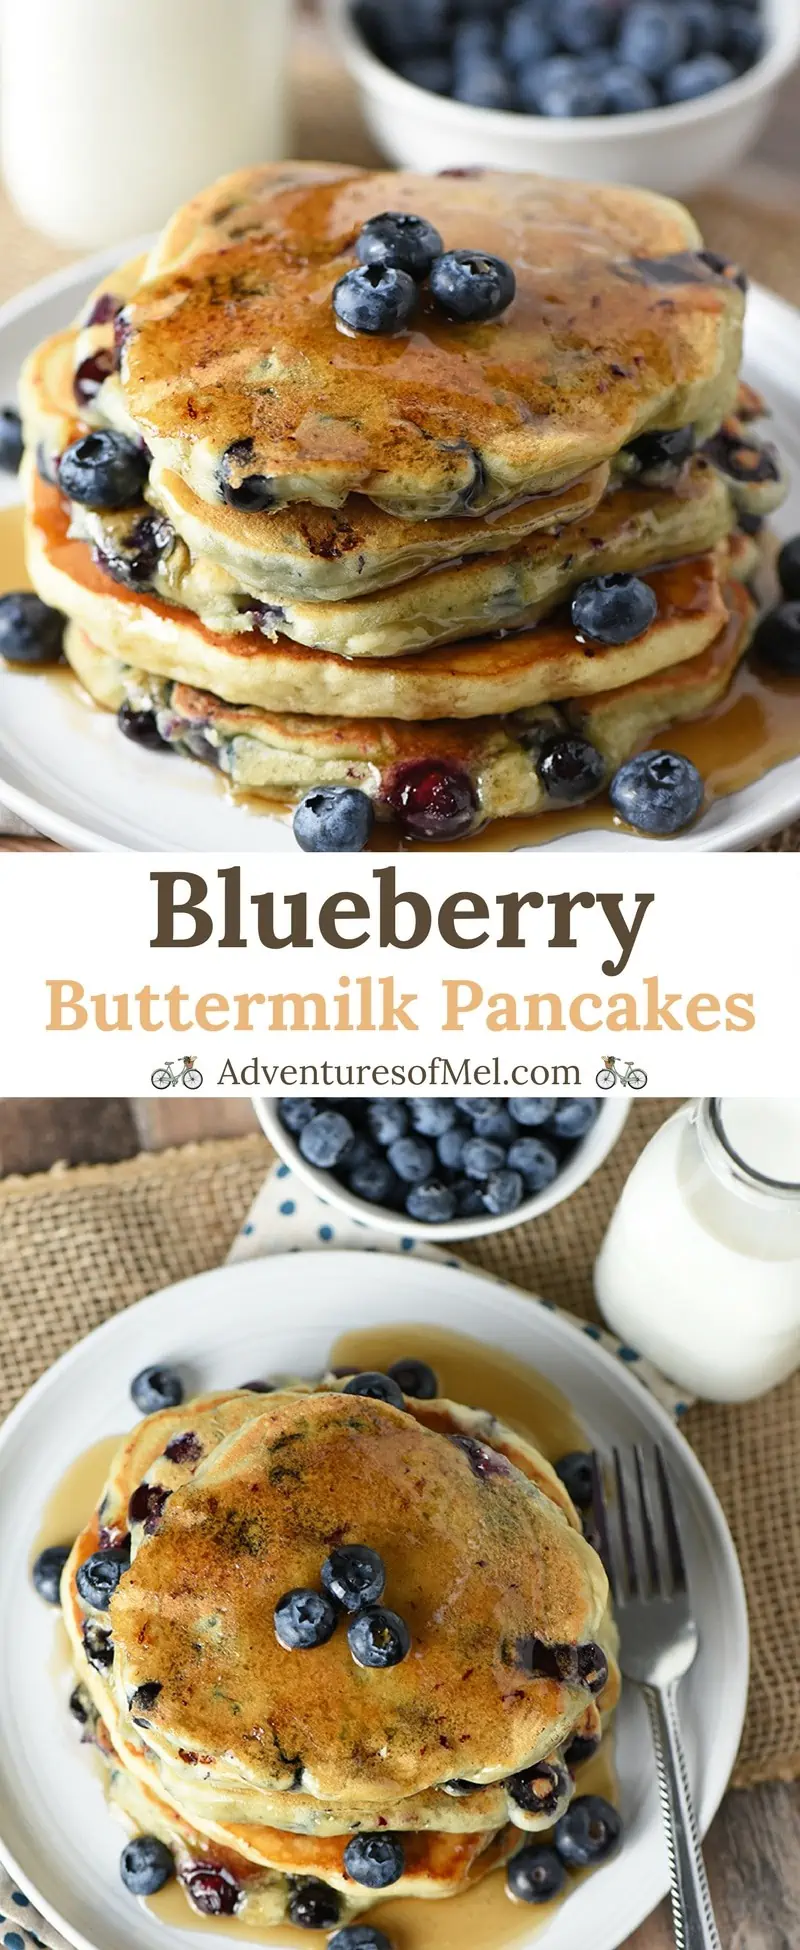 Stack of homemade Blueberry Buttermilk Pancakes